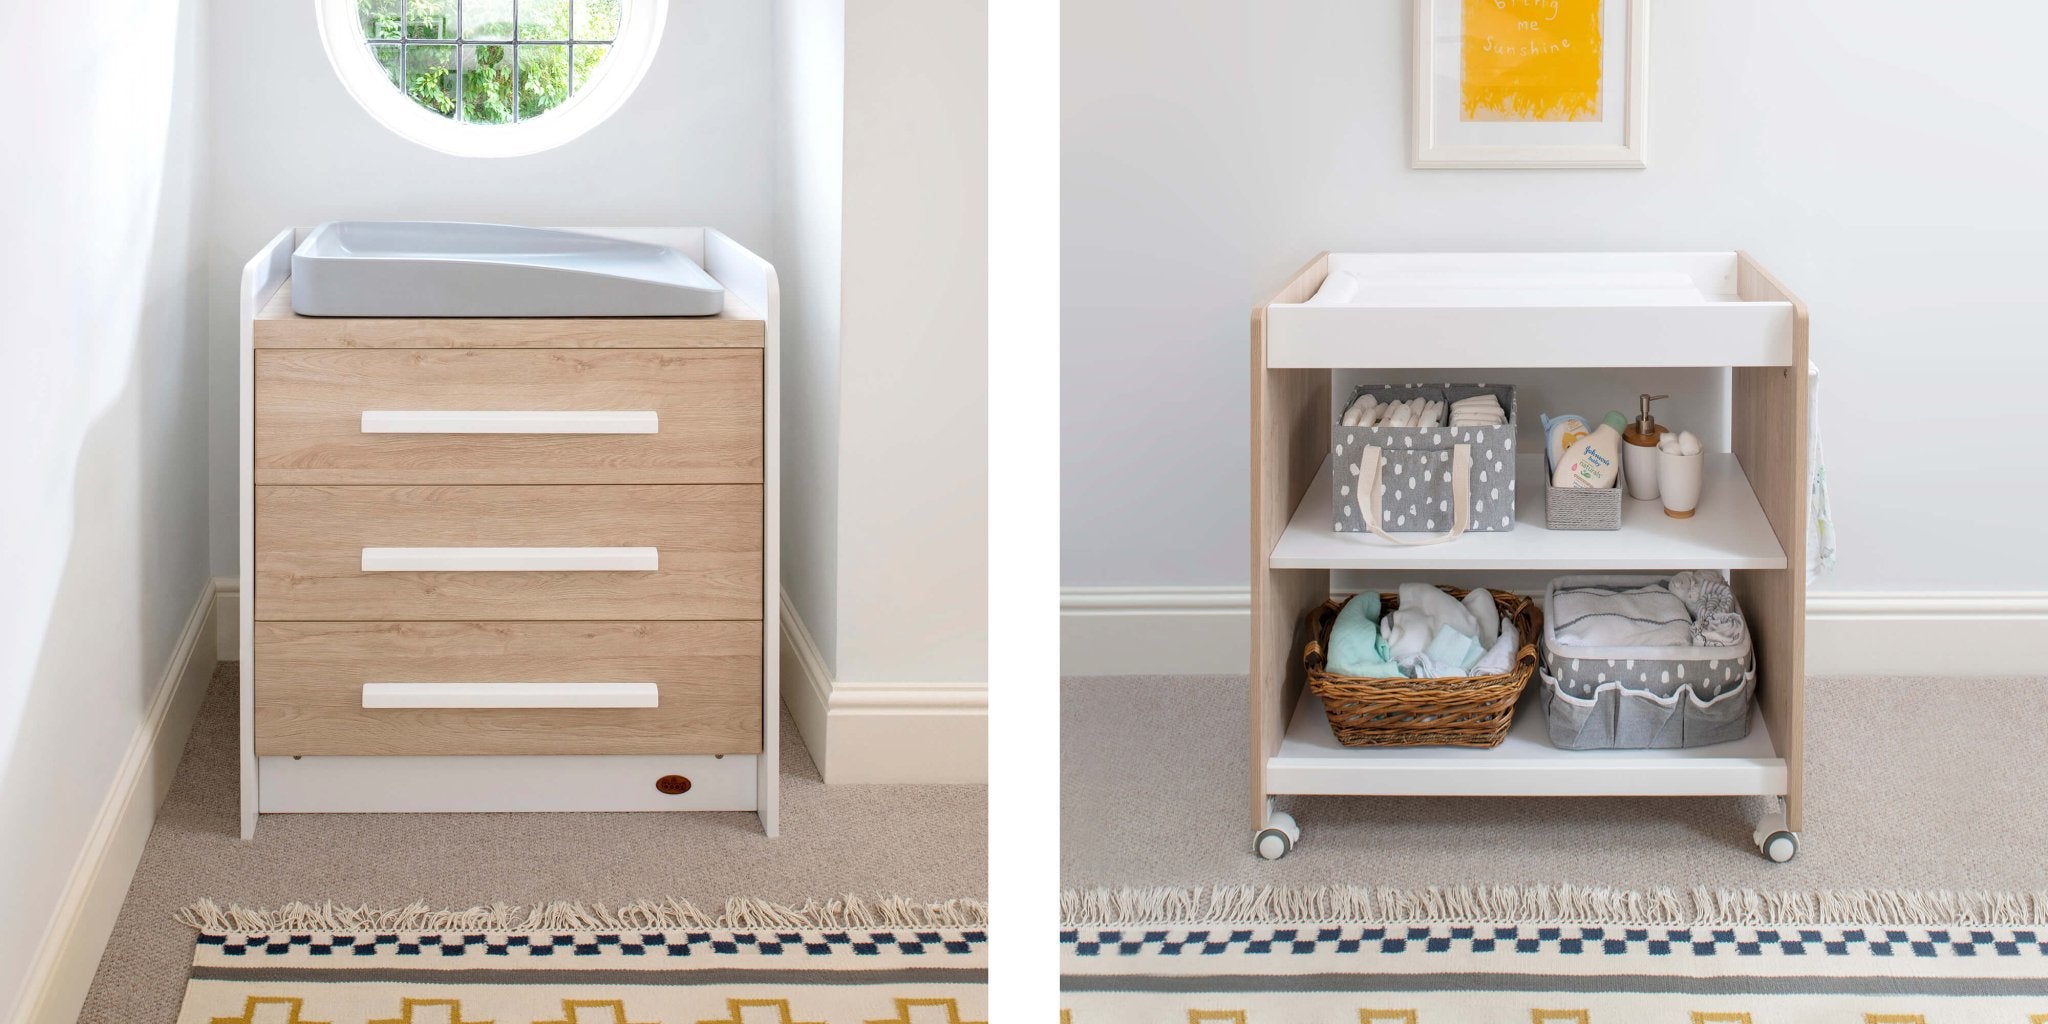 matching chest of drawers and 3 tier baby changer on wheels